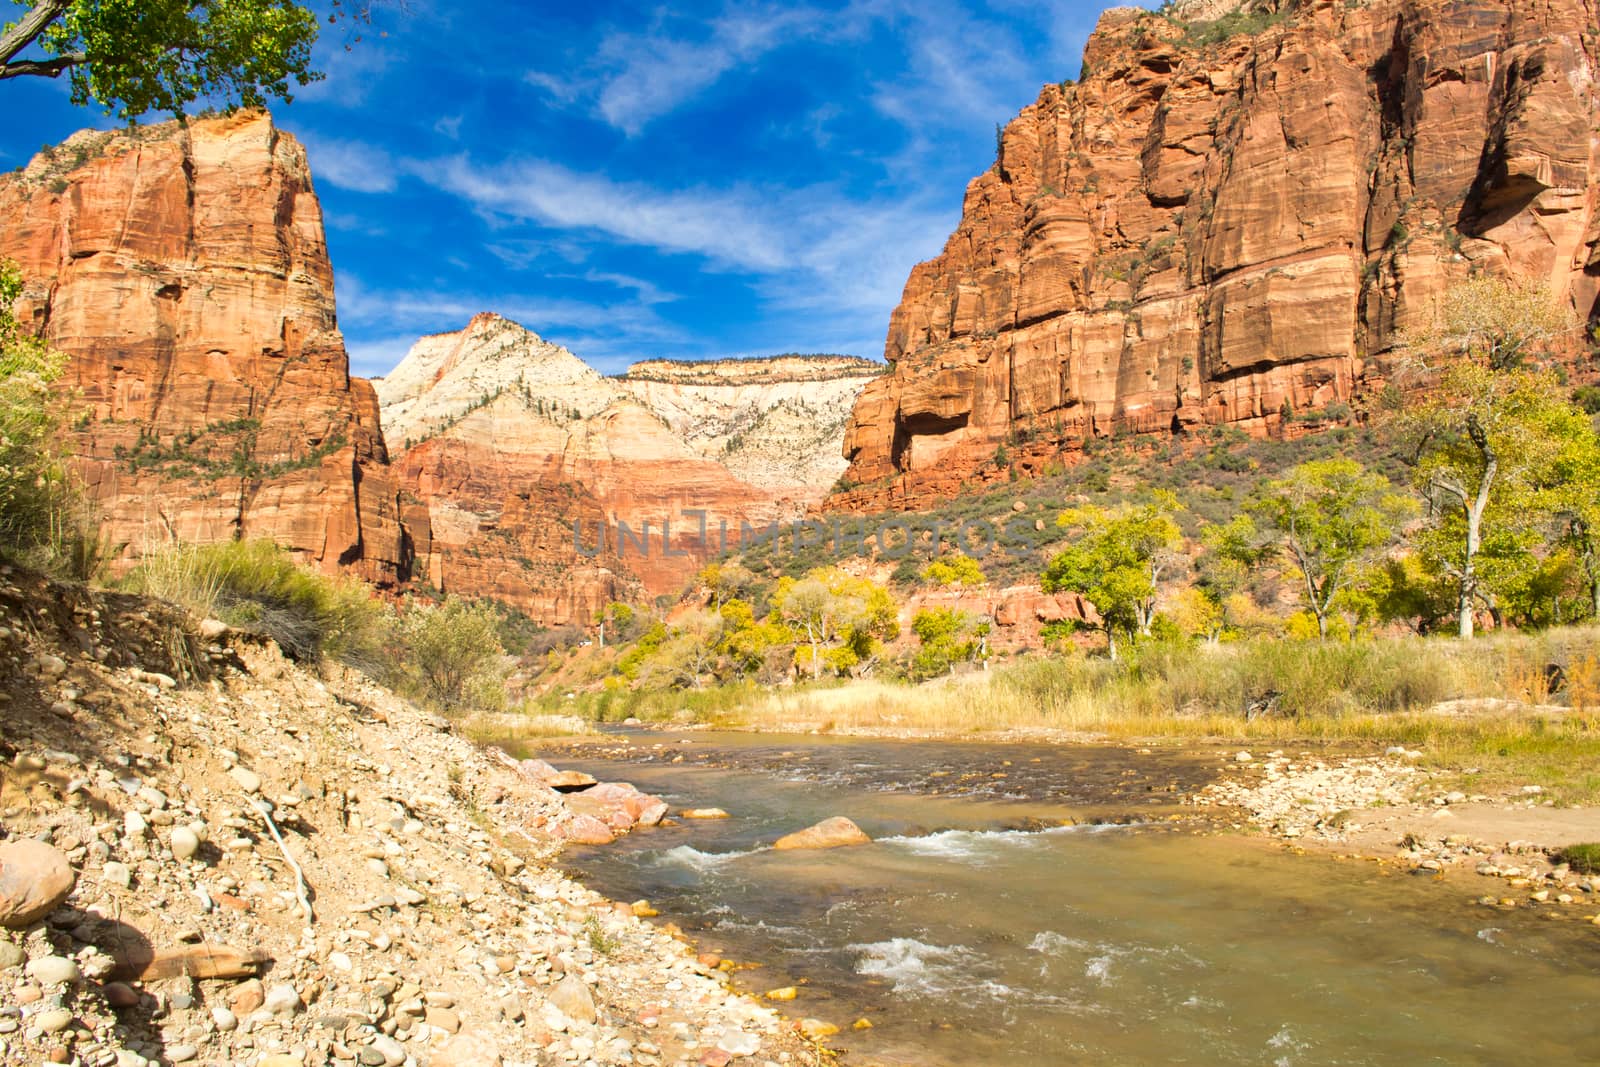 View on a river Virgin flowing through Zion national park in Utah, United states. Travel and tourism.